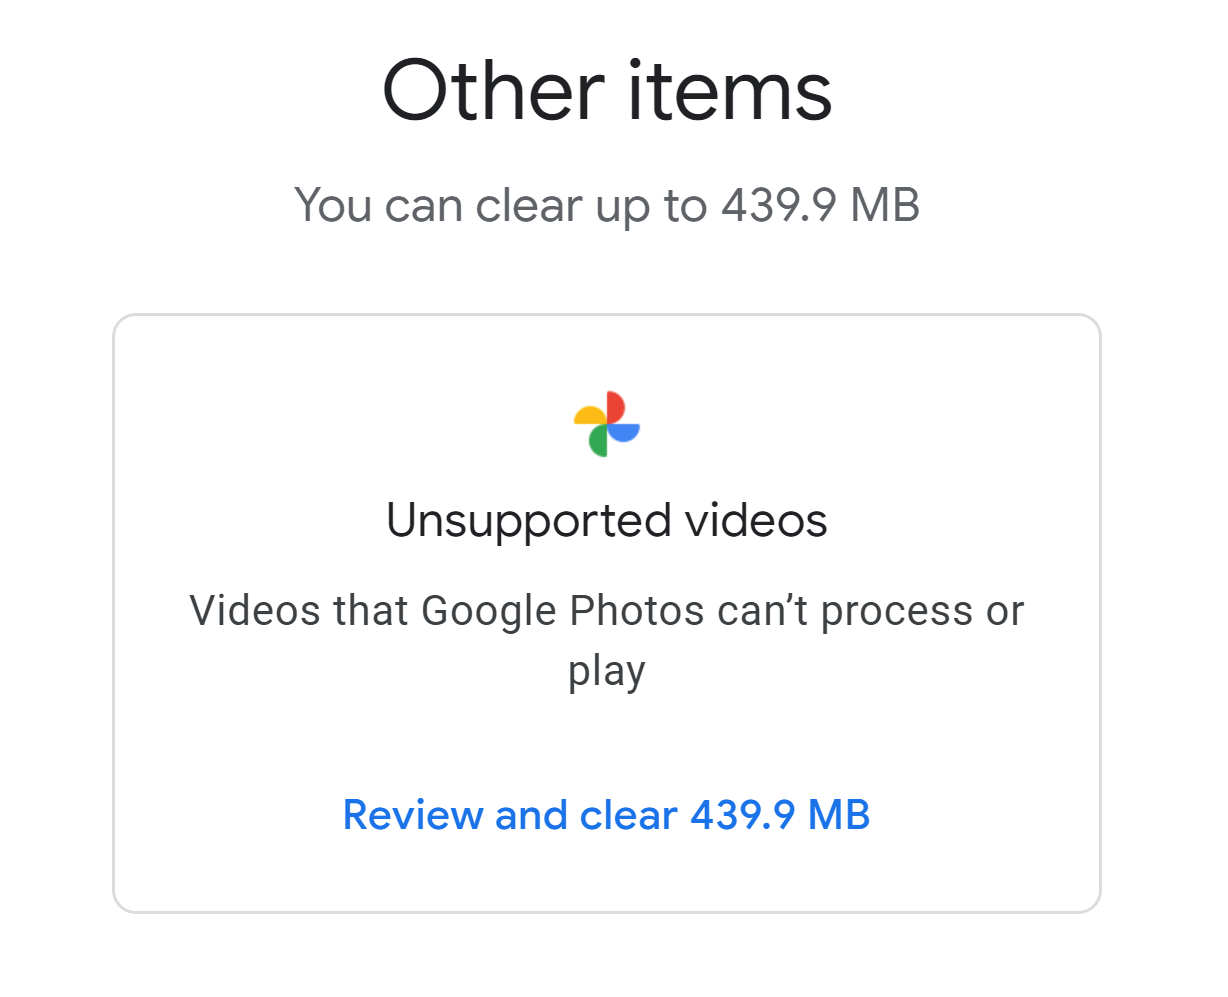 Other Items in Google One